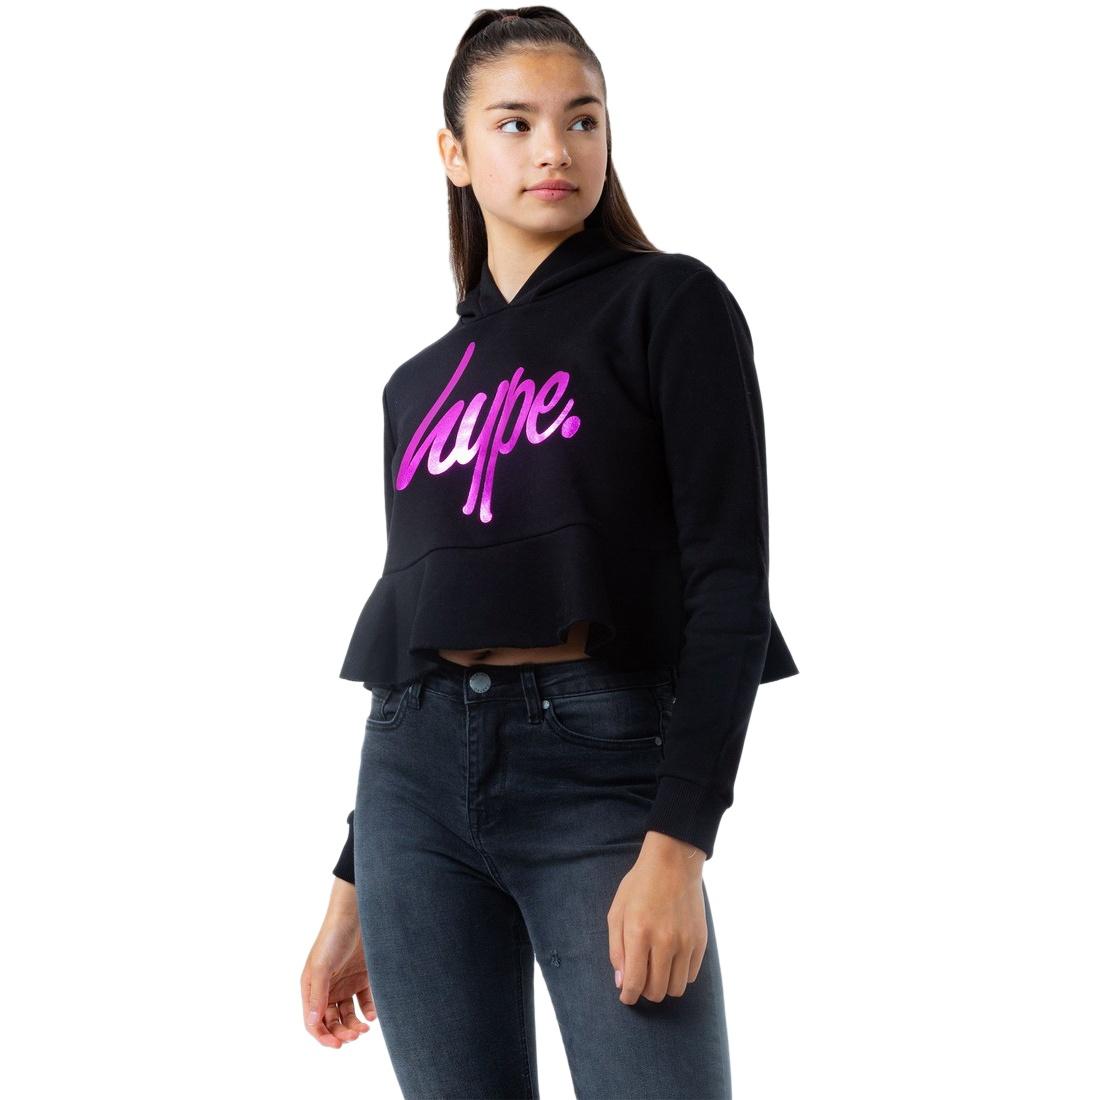 Hype Girls Holo Script cropped trui met capuchon